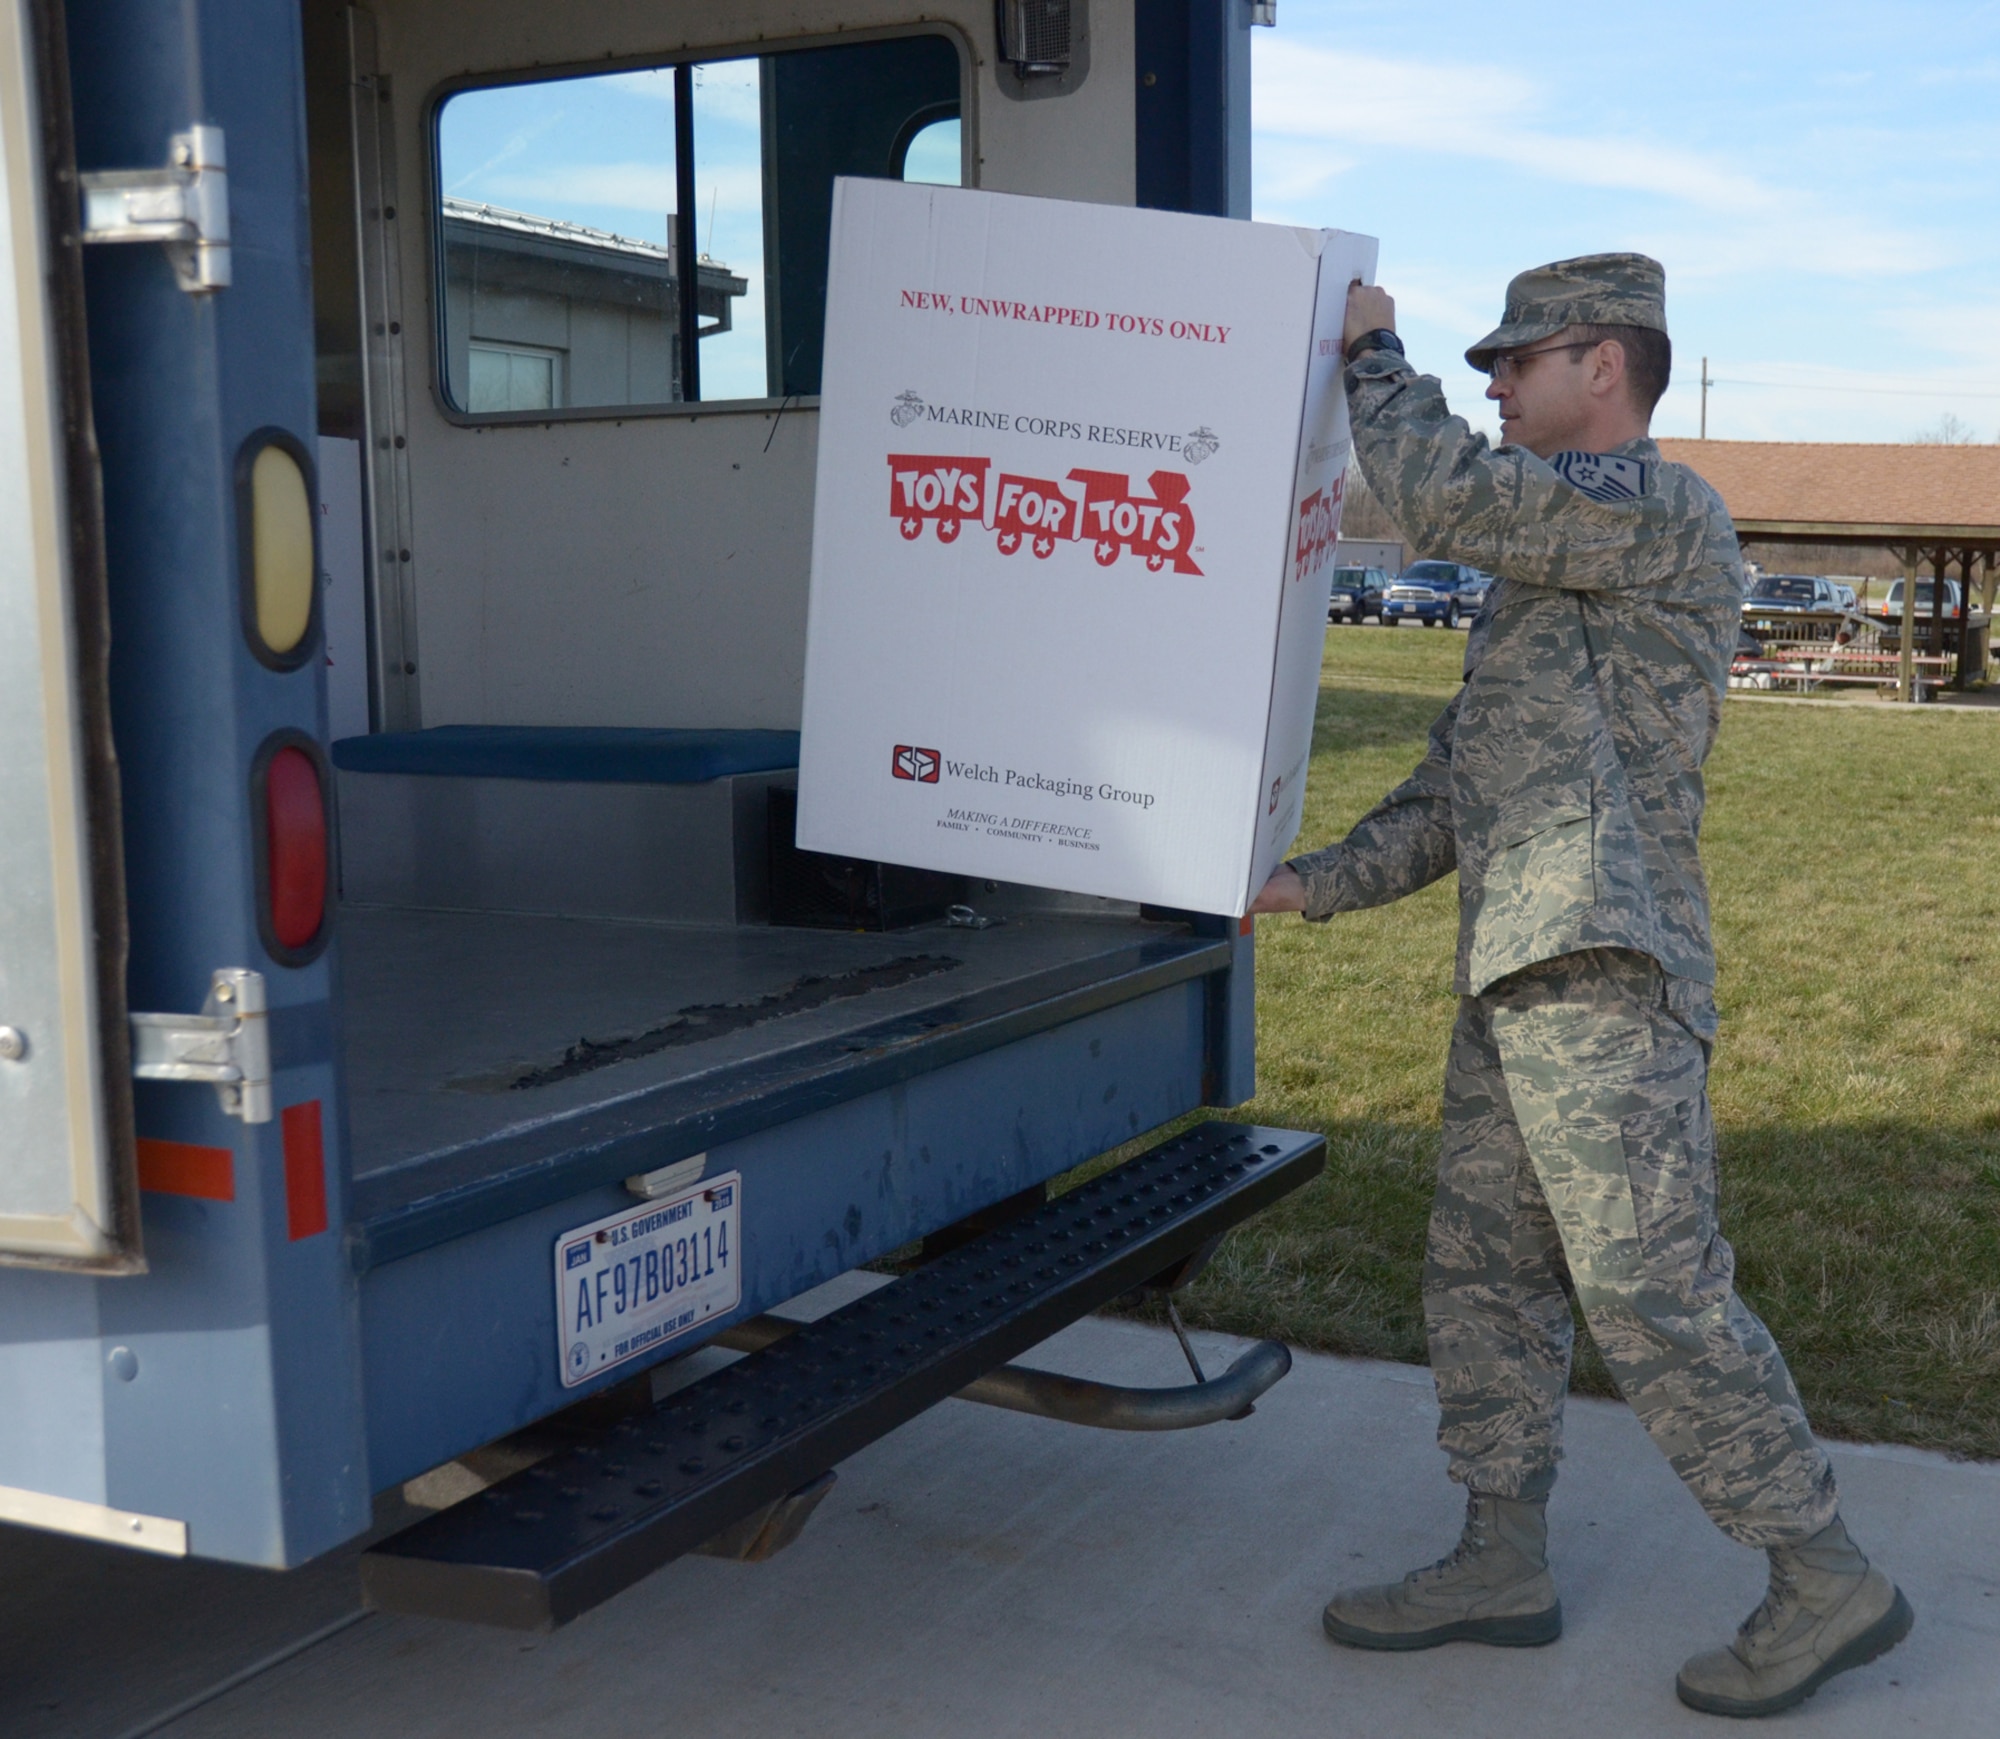 WRIGHT-PATTERSON AIR FORCE BASE, Ohio - Master Sgt. Anthony Johns, 445th Operations Support Squadron first sergeant, loads boxes of toys donated by 445th Airlift Wing members onto a truck during the last day of the Toys for Tots program Dec. 12. The wing collected 642 toys weighing 259 pounds. (U.S. Air Force photo/Stacy Vaughn)